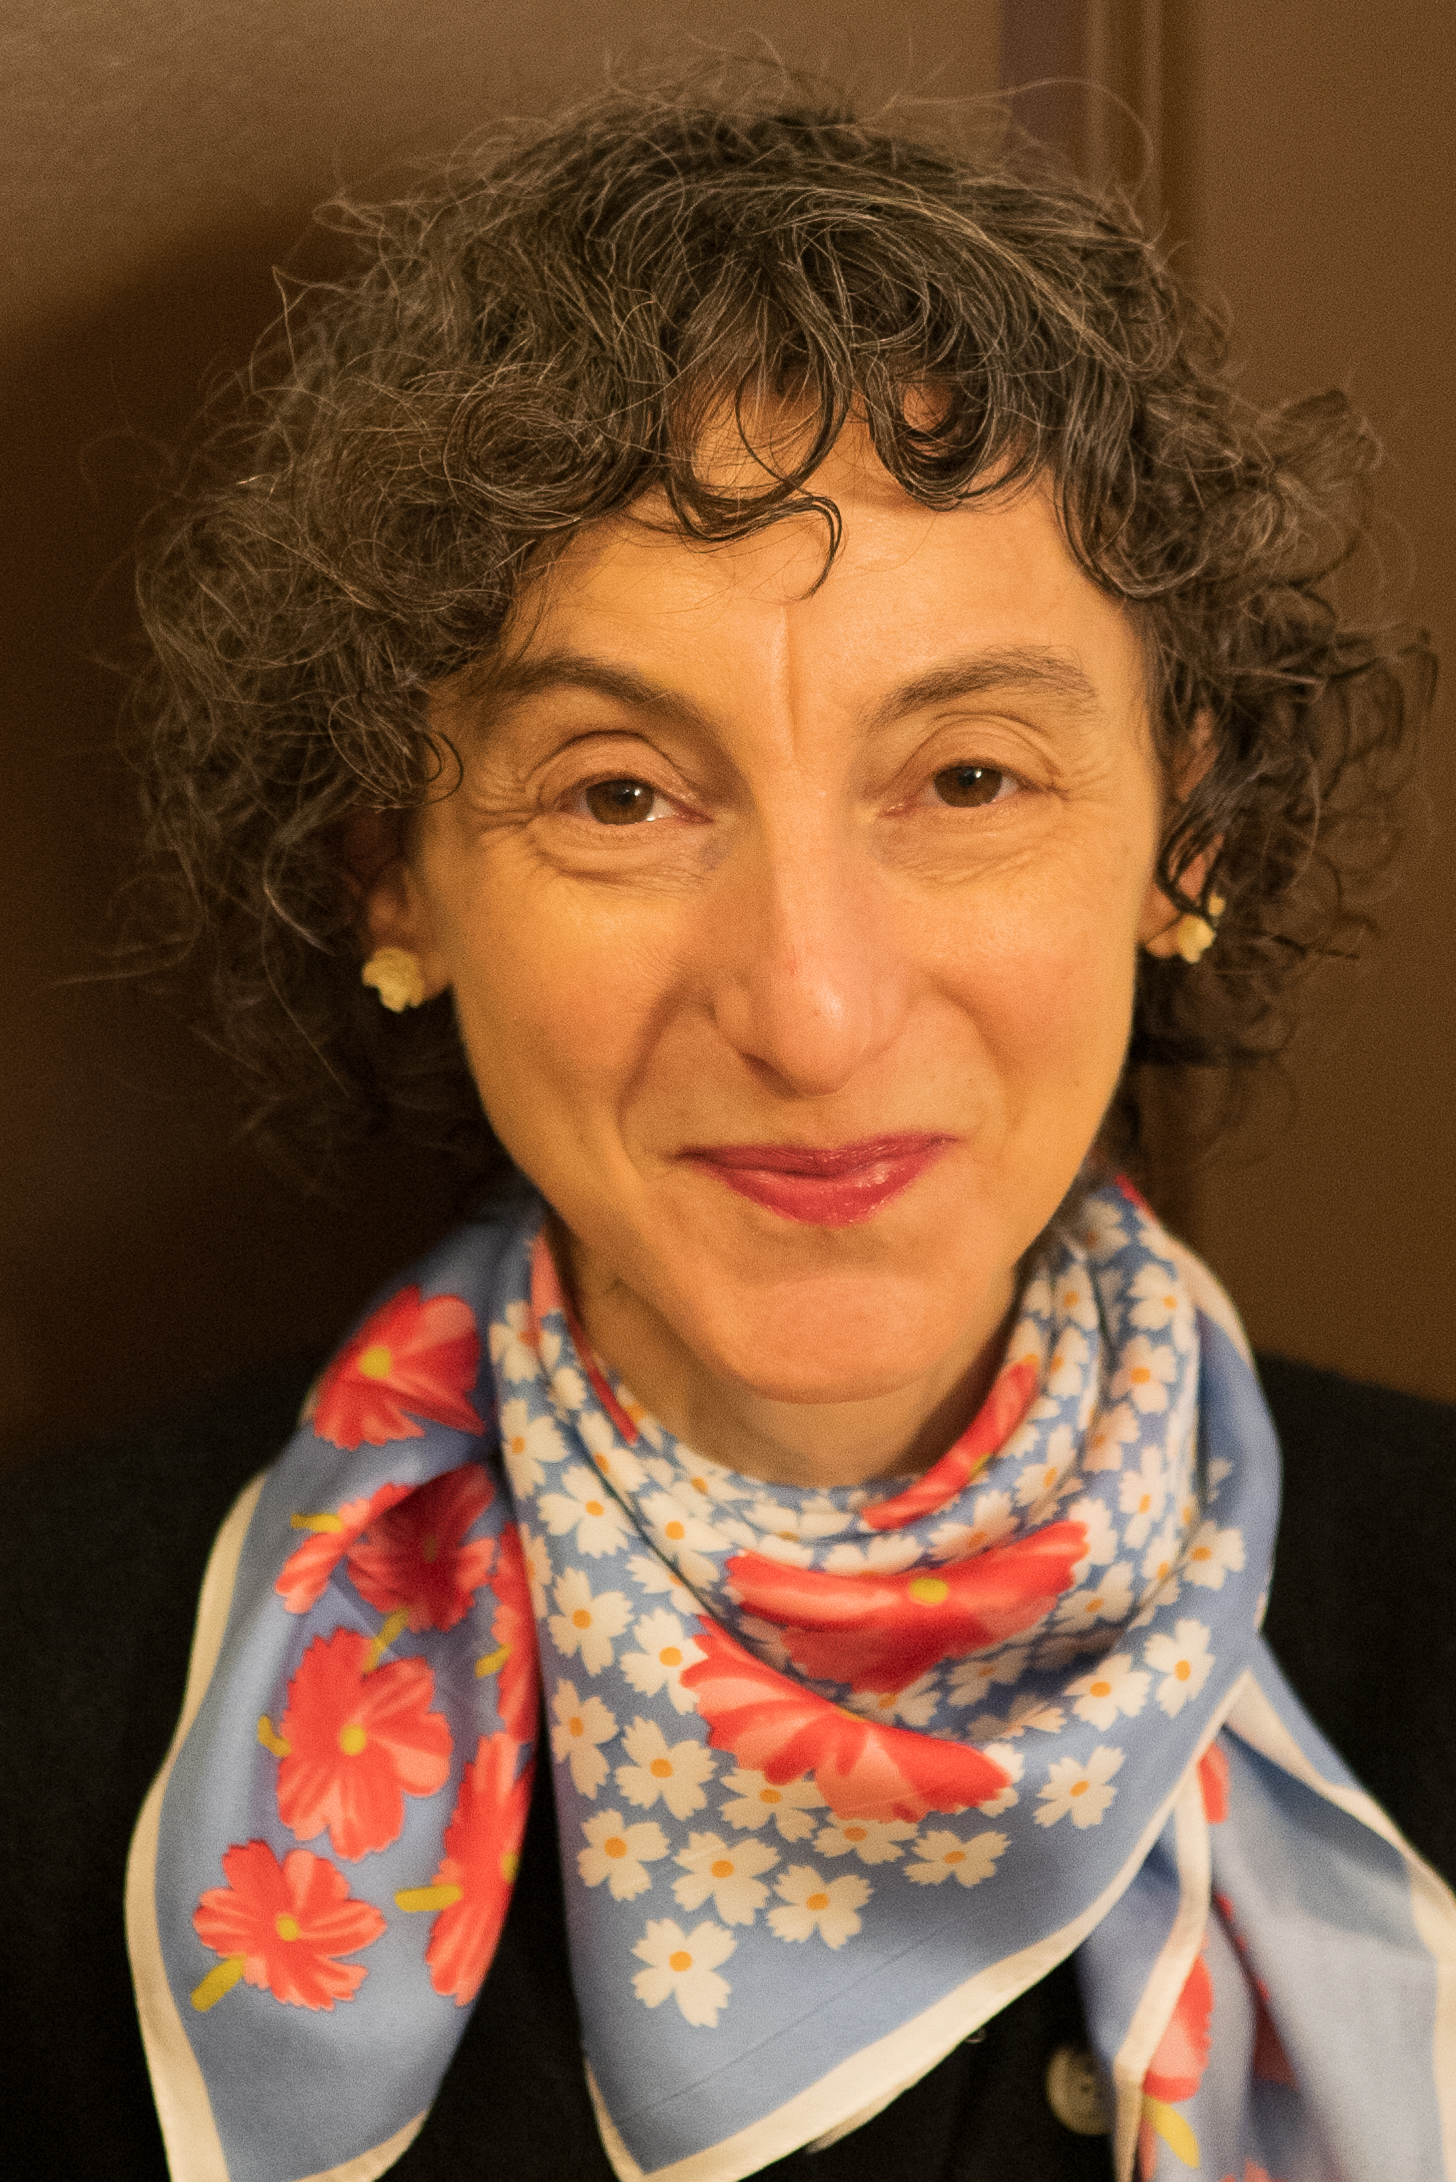 Headshot of Sandie Friedman smiling with a colorful scarf.